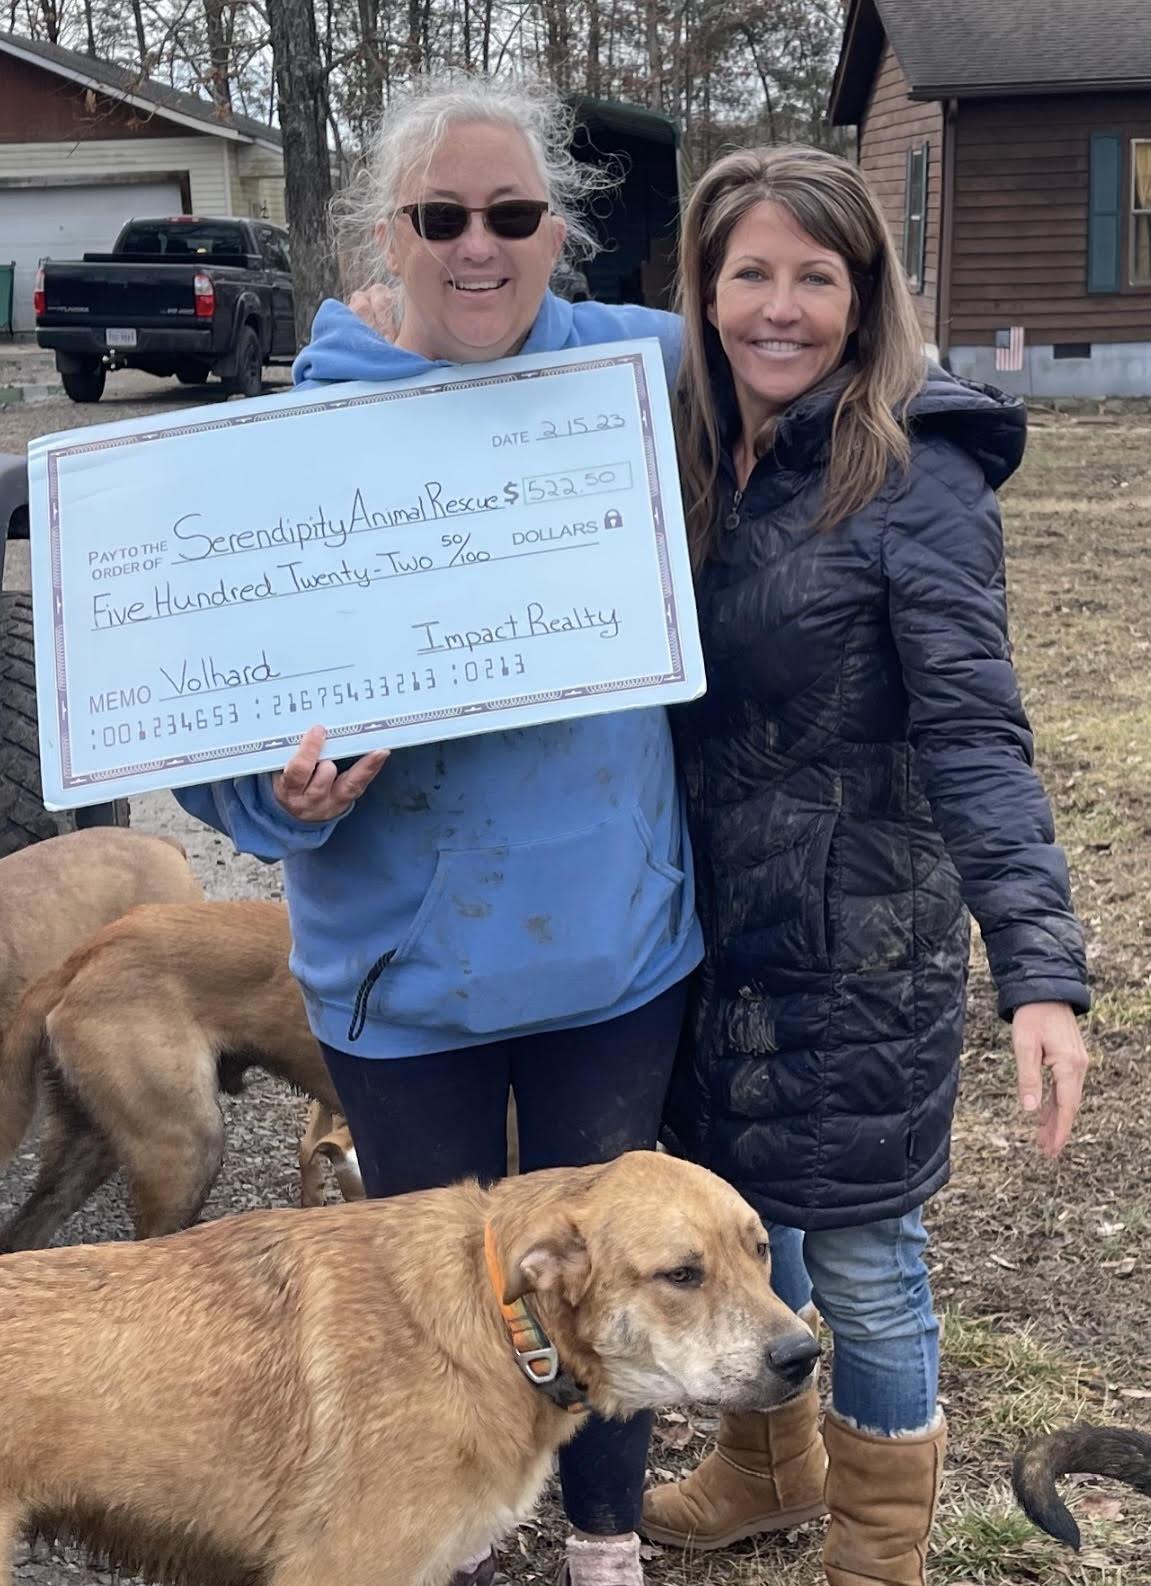 Impact Realty charity donation to Serendipity Animal Rescue